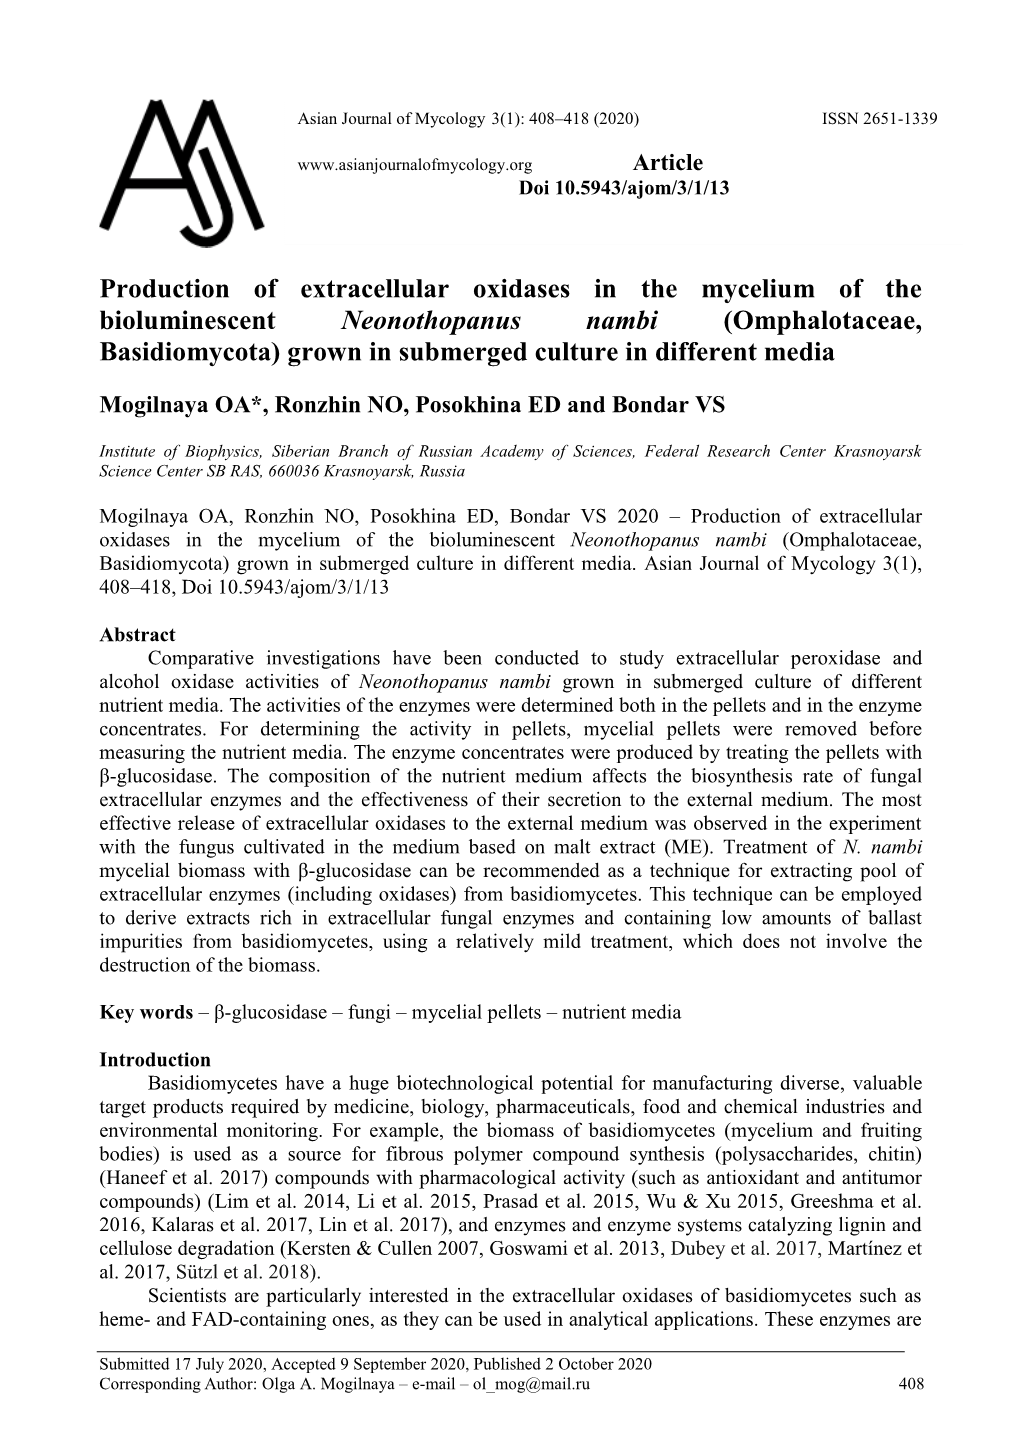 Production of Extracellular Oxidases in the Mycelium of the Bioluminescent Neonothopanus Nambi